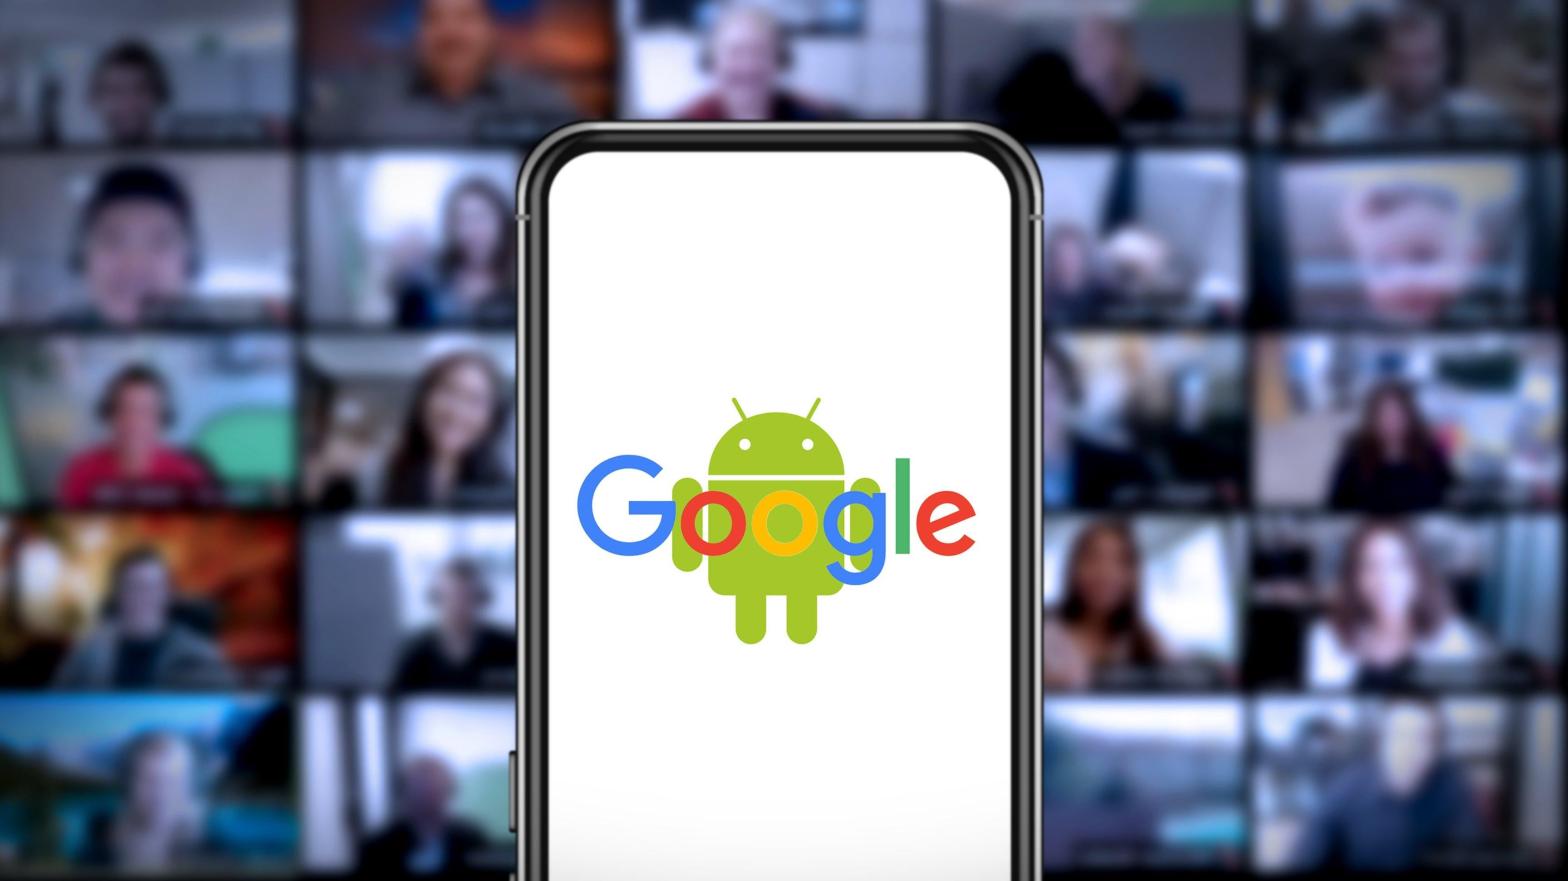 Google's new open source tool Magritte can automatically identify objects in videos to add blur to them. (Photo: DANIEL CONSTANTE, Shutterstock)